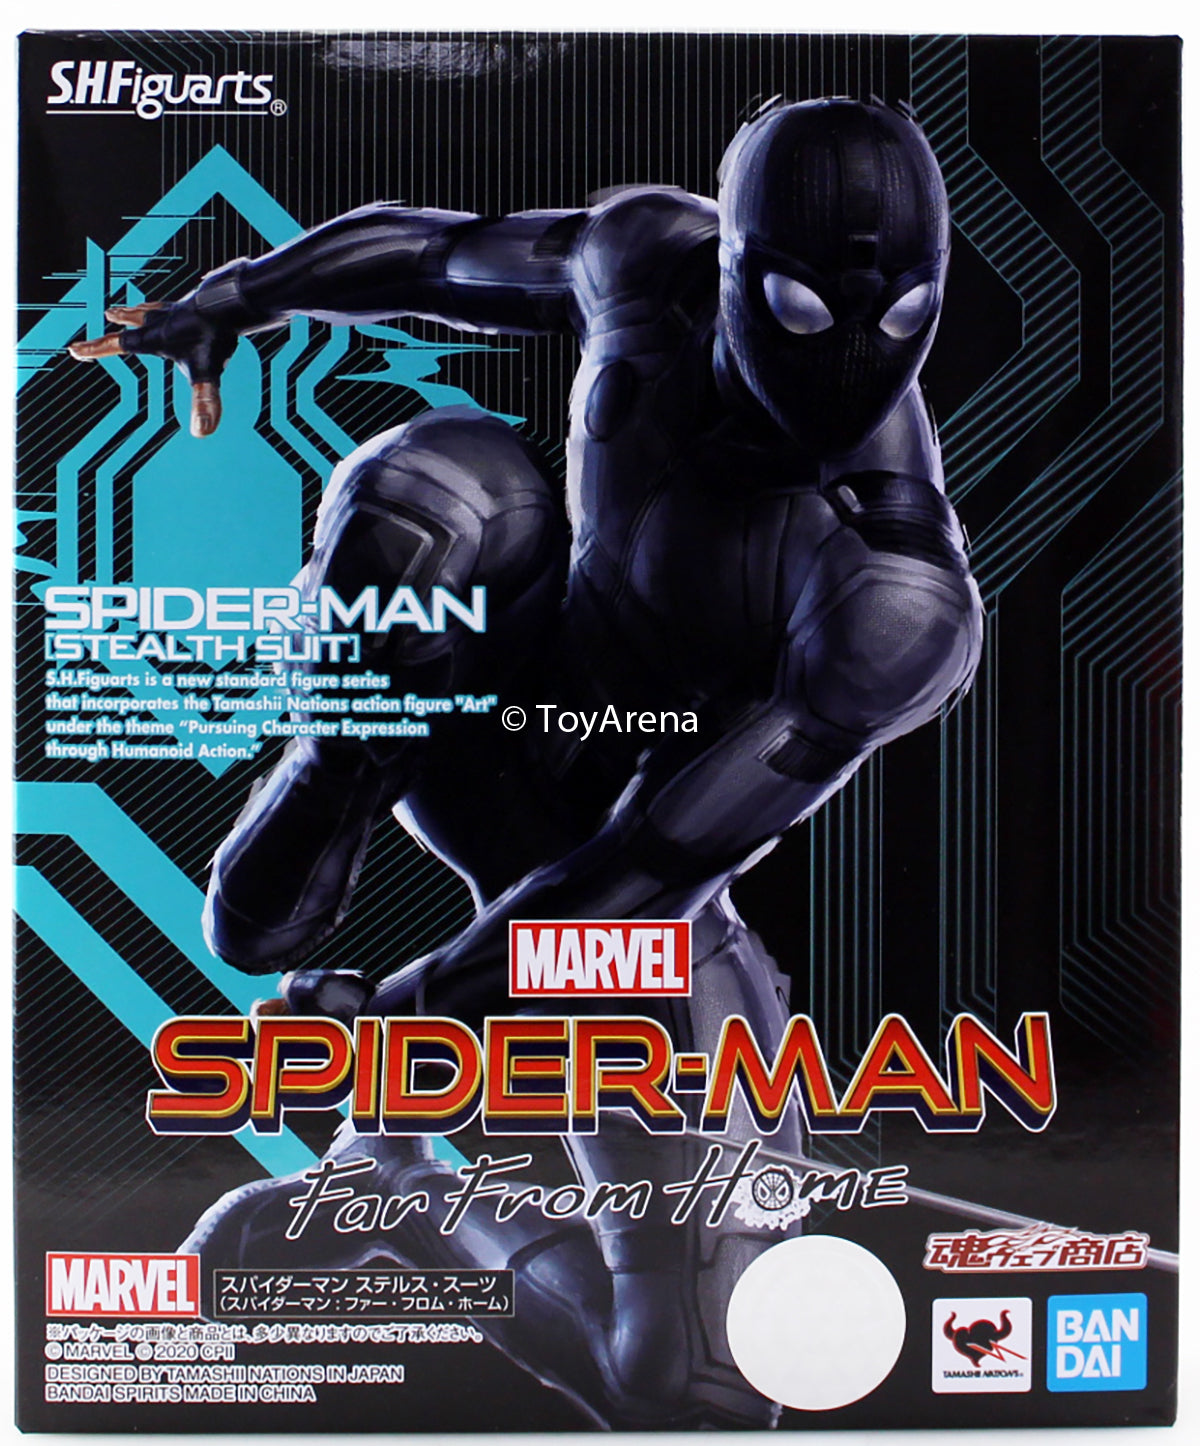 S.H. Figuarts Marvel Spiderman Far From Home Spiderman Stealth Suit Action Figure